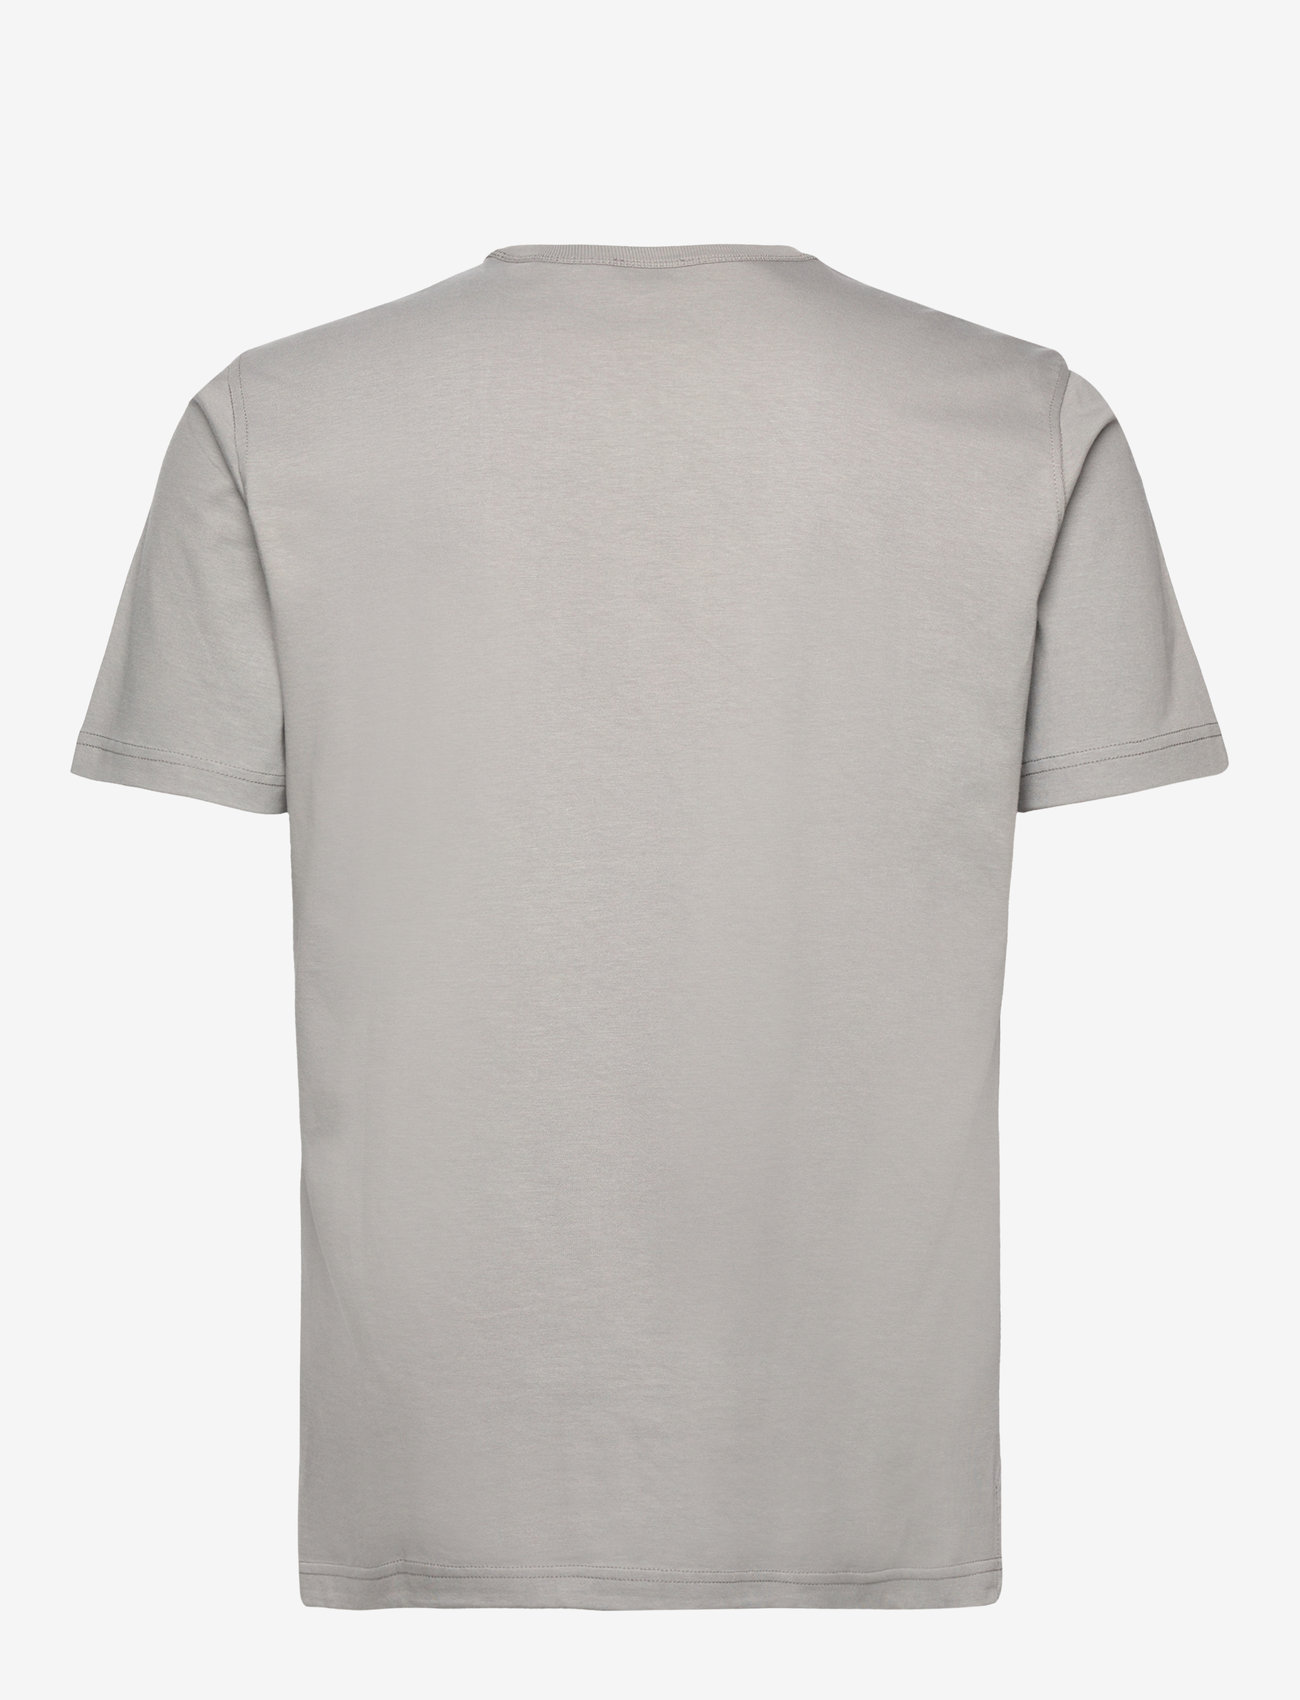 Diesel - T-JUST-OD T-SHIRT - short-sleeved t-shirts - dove/grey - 1